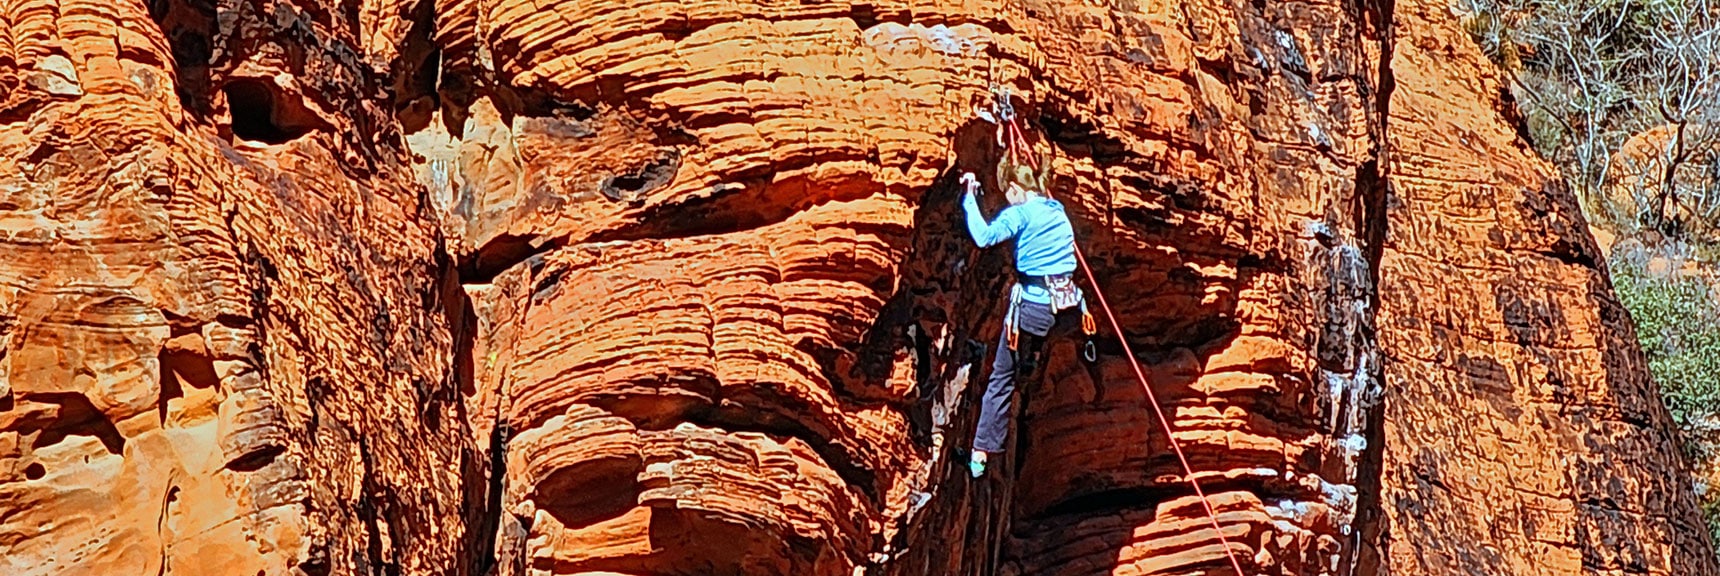 You'll Never See Me Doing This, But It's Fun to Watch | Lower Calico Hills Loop | Calico Basin & Red Rock Canyon, Nevada